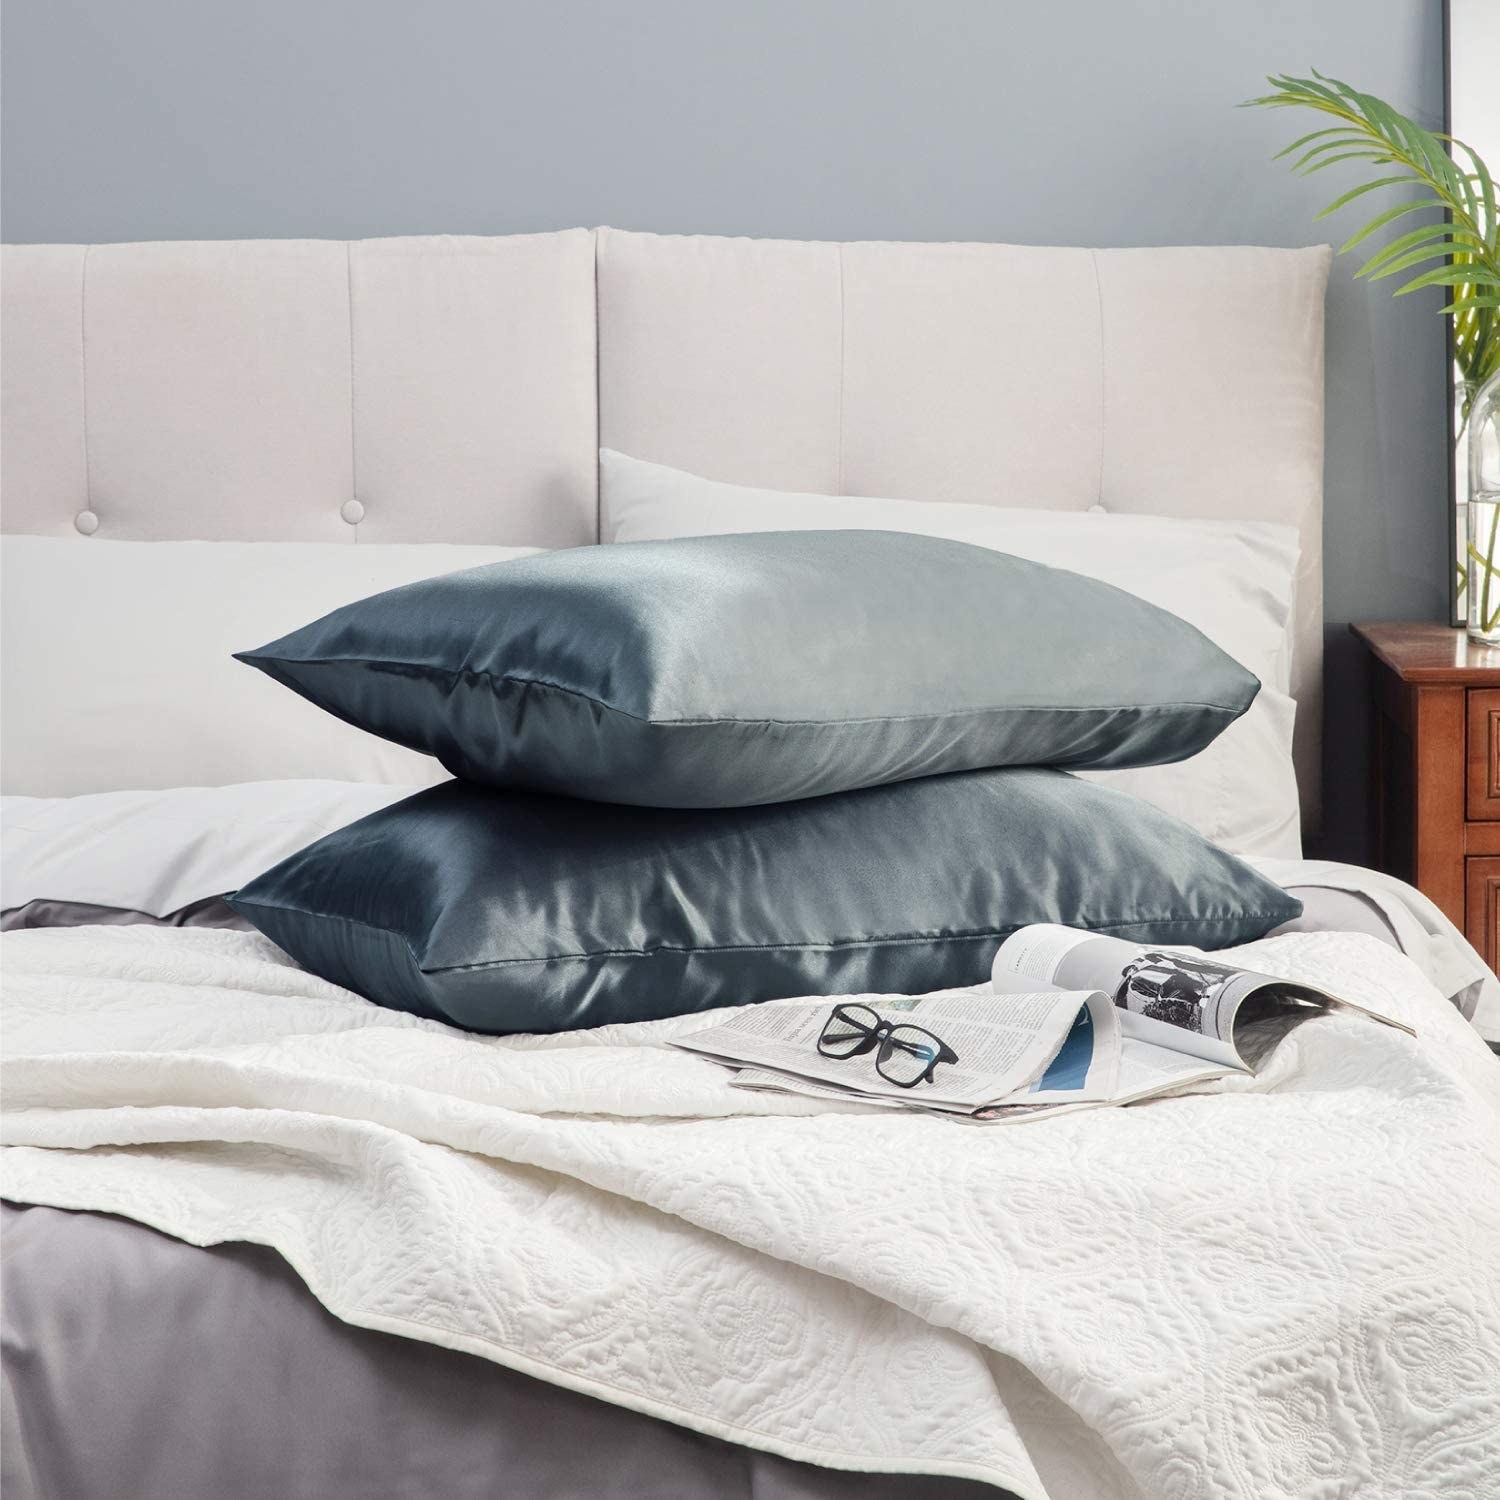 Two pillows inside of satin pillowcases on a bed